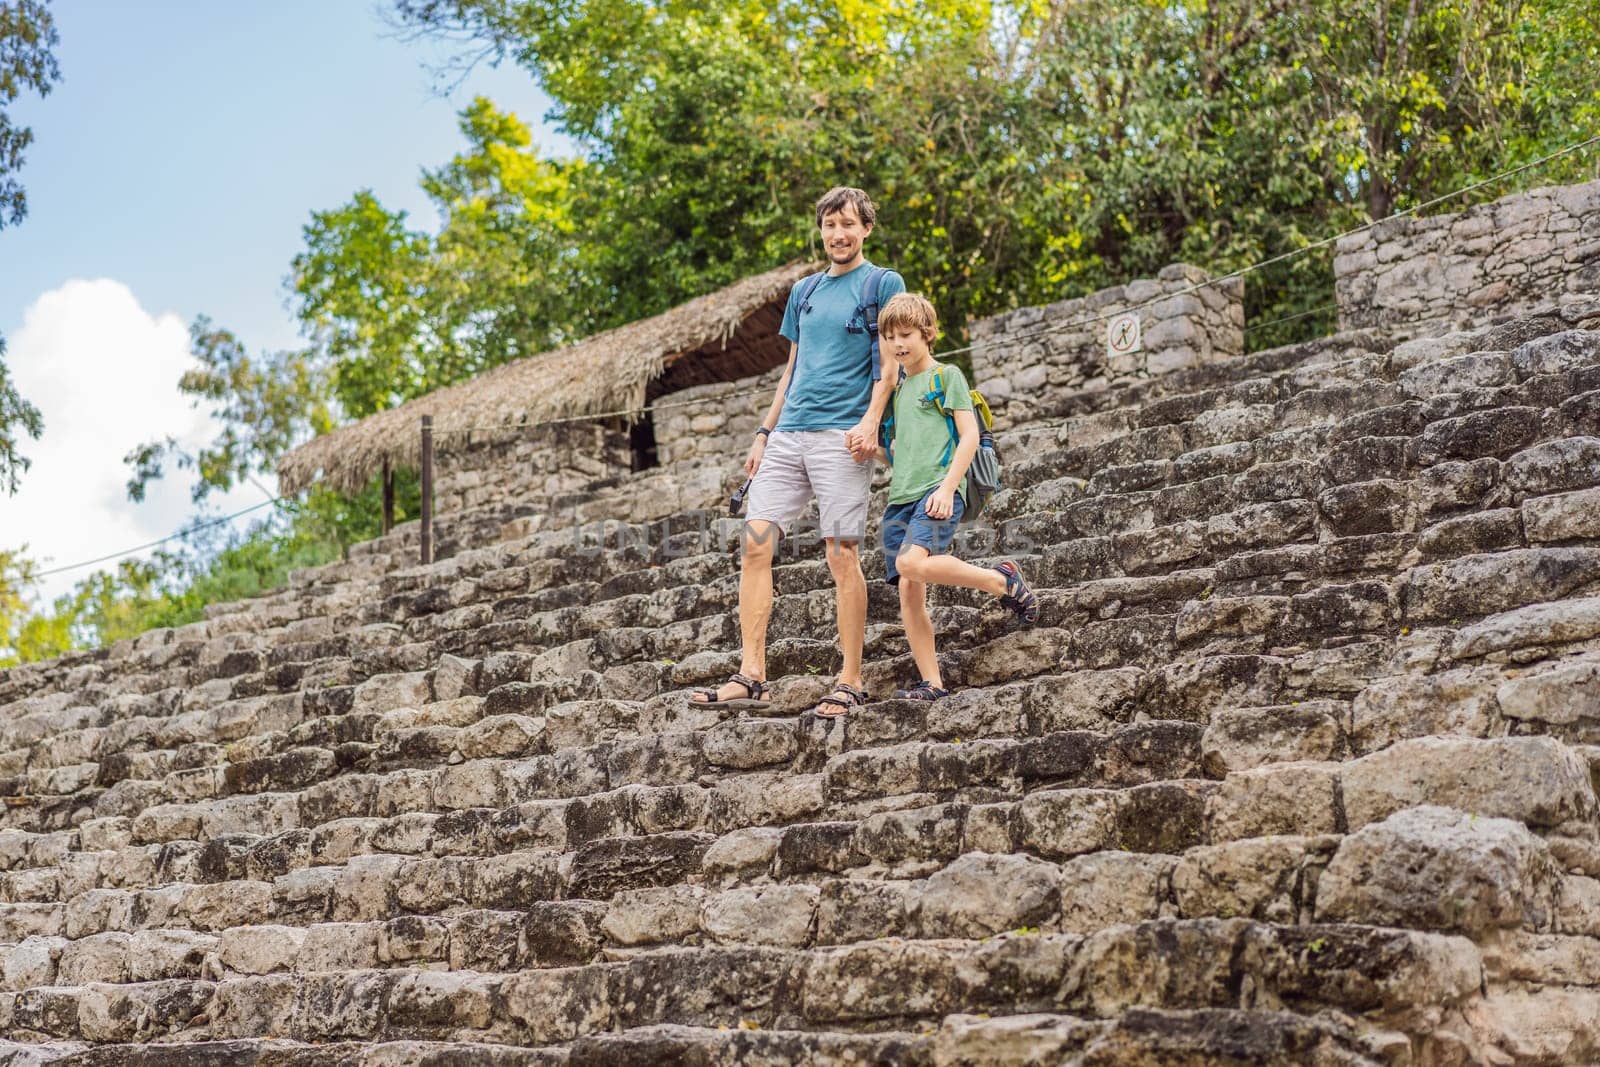 Dad and son tourists at Coba, Mexico. Ancient mayan city in Mexico. Coba is an archaeological area and a famous landmark of Yucatan Peninsula. Cloudy sky over a pyramid in Mexico by galitskaya